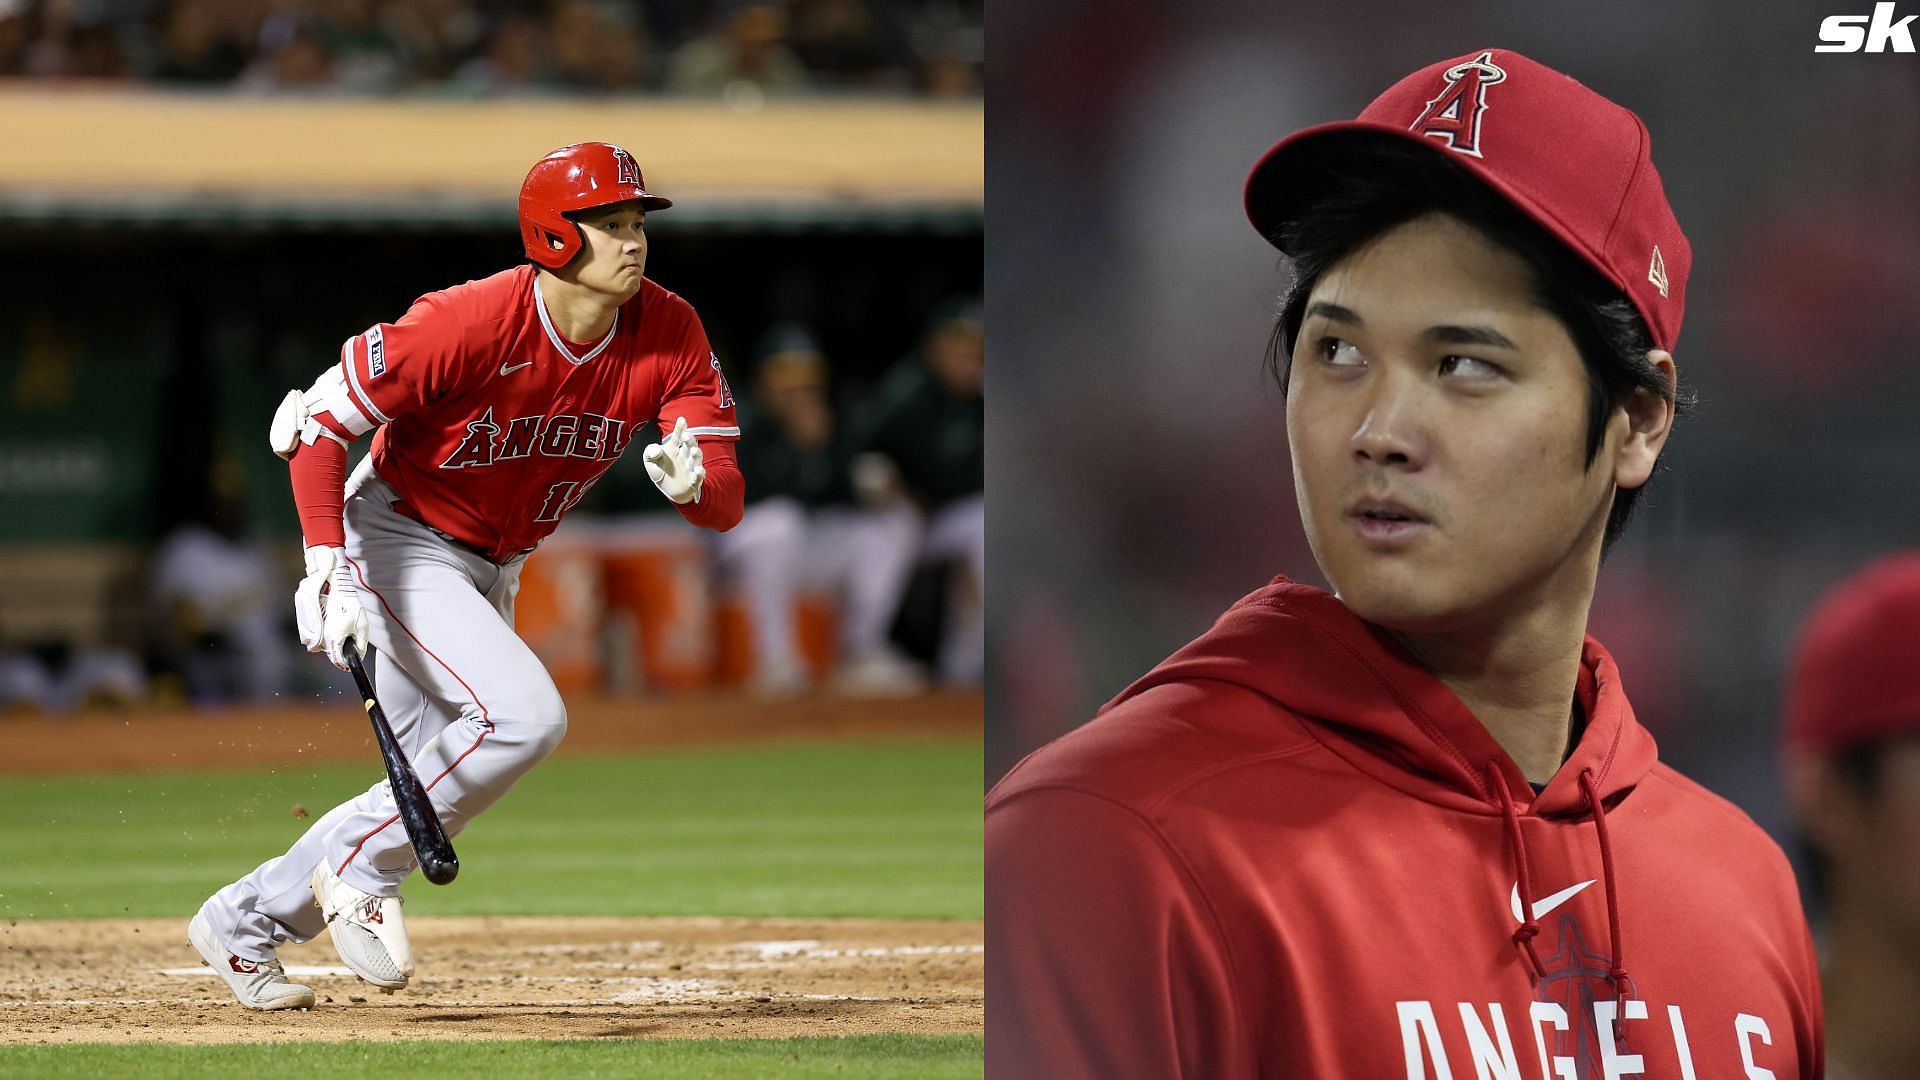 Shohei Ohtani of the Los Angeles Angels hits a double against the Oakland Athletics